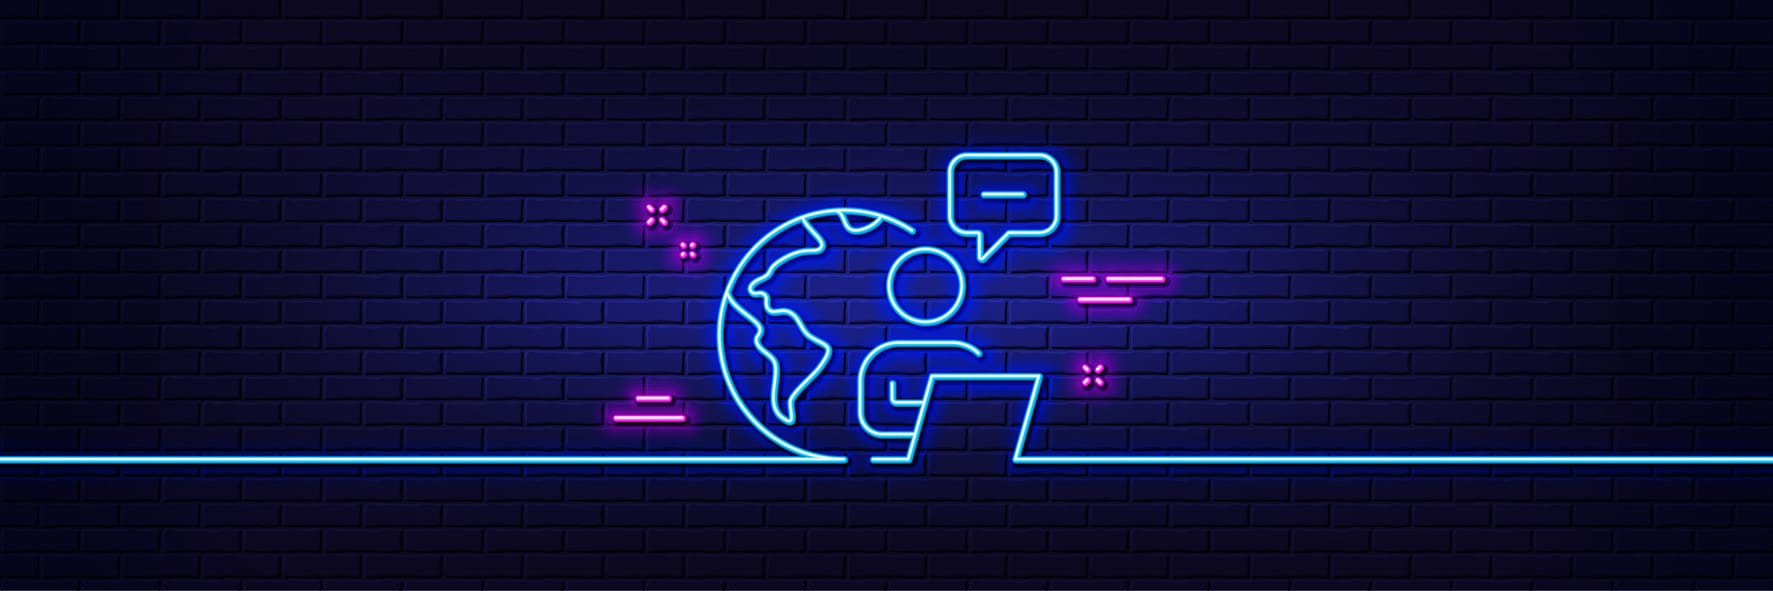 work line icon with neon light effect